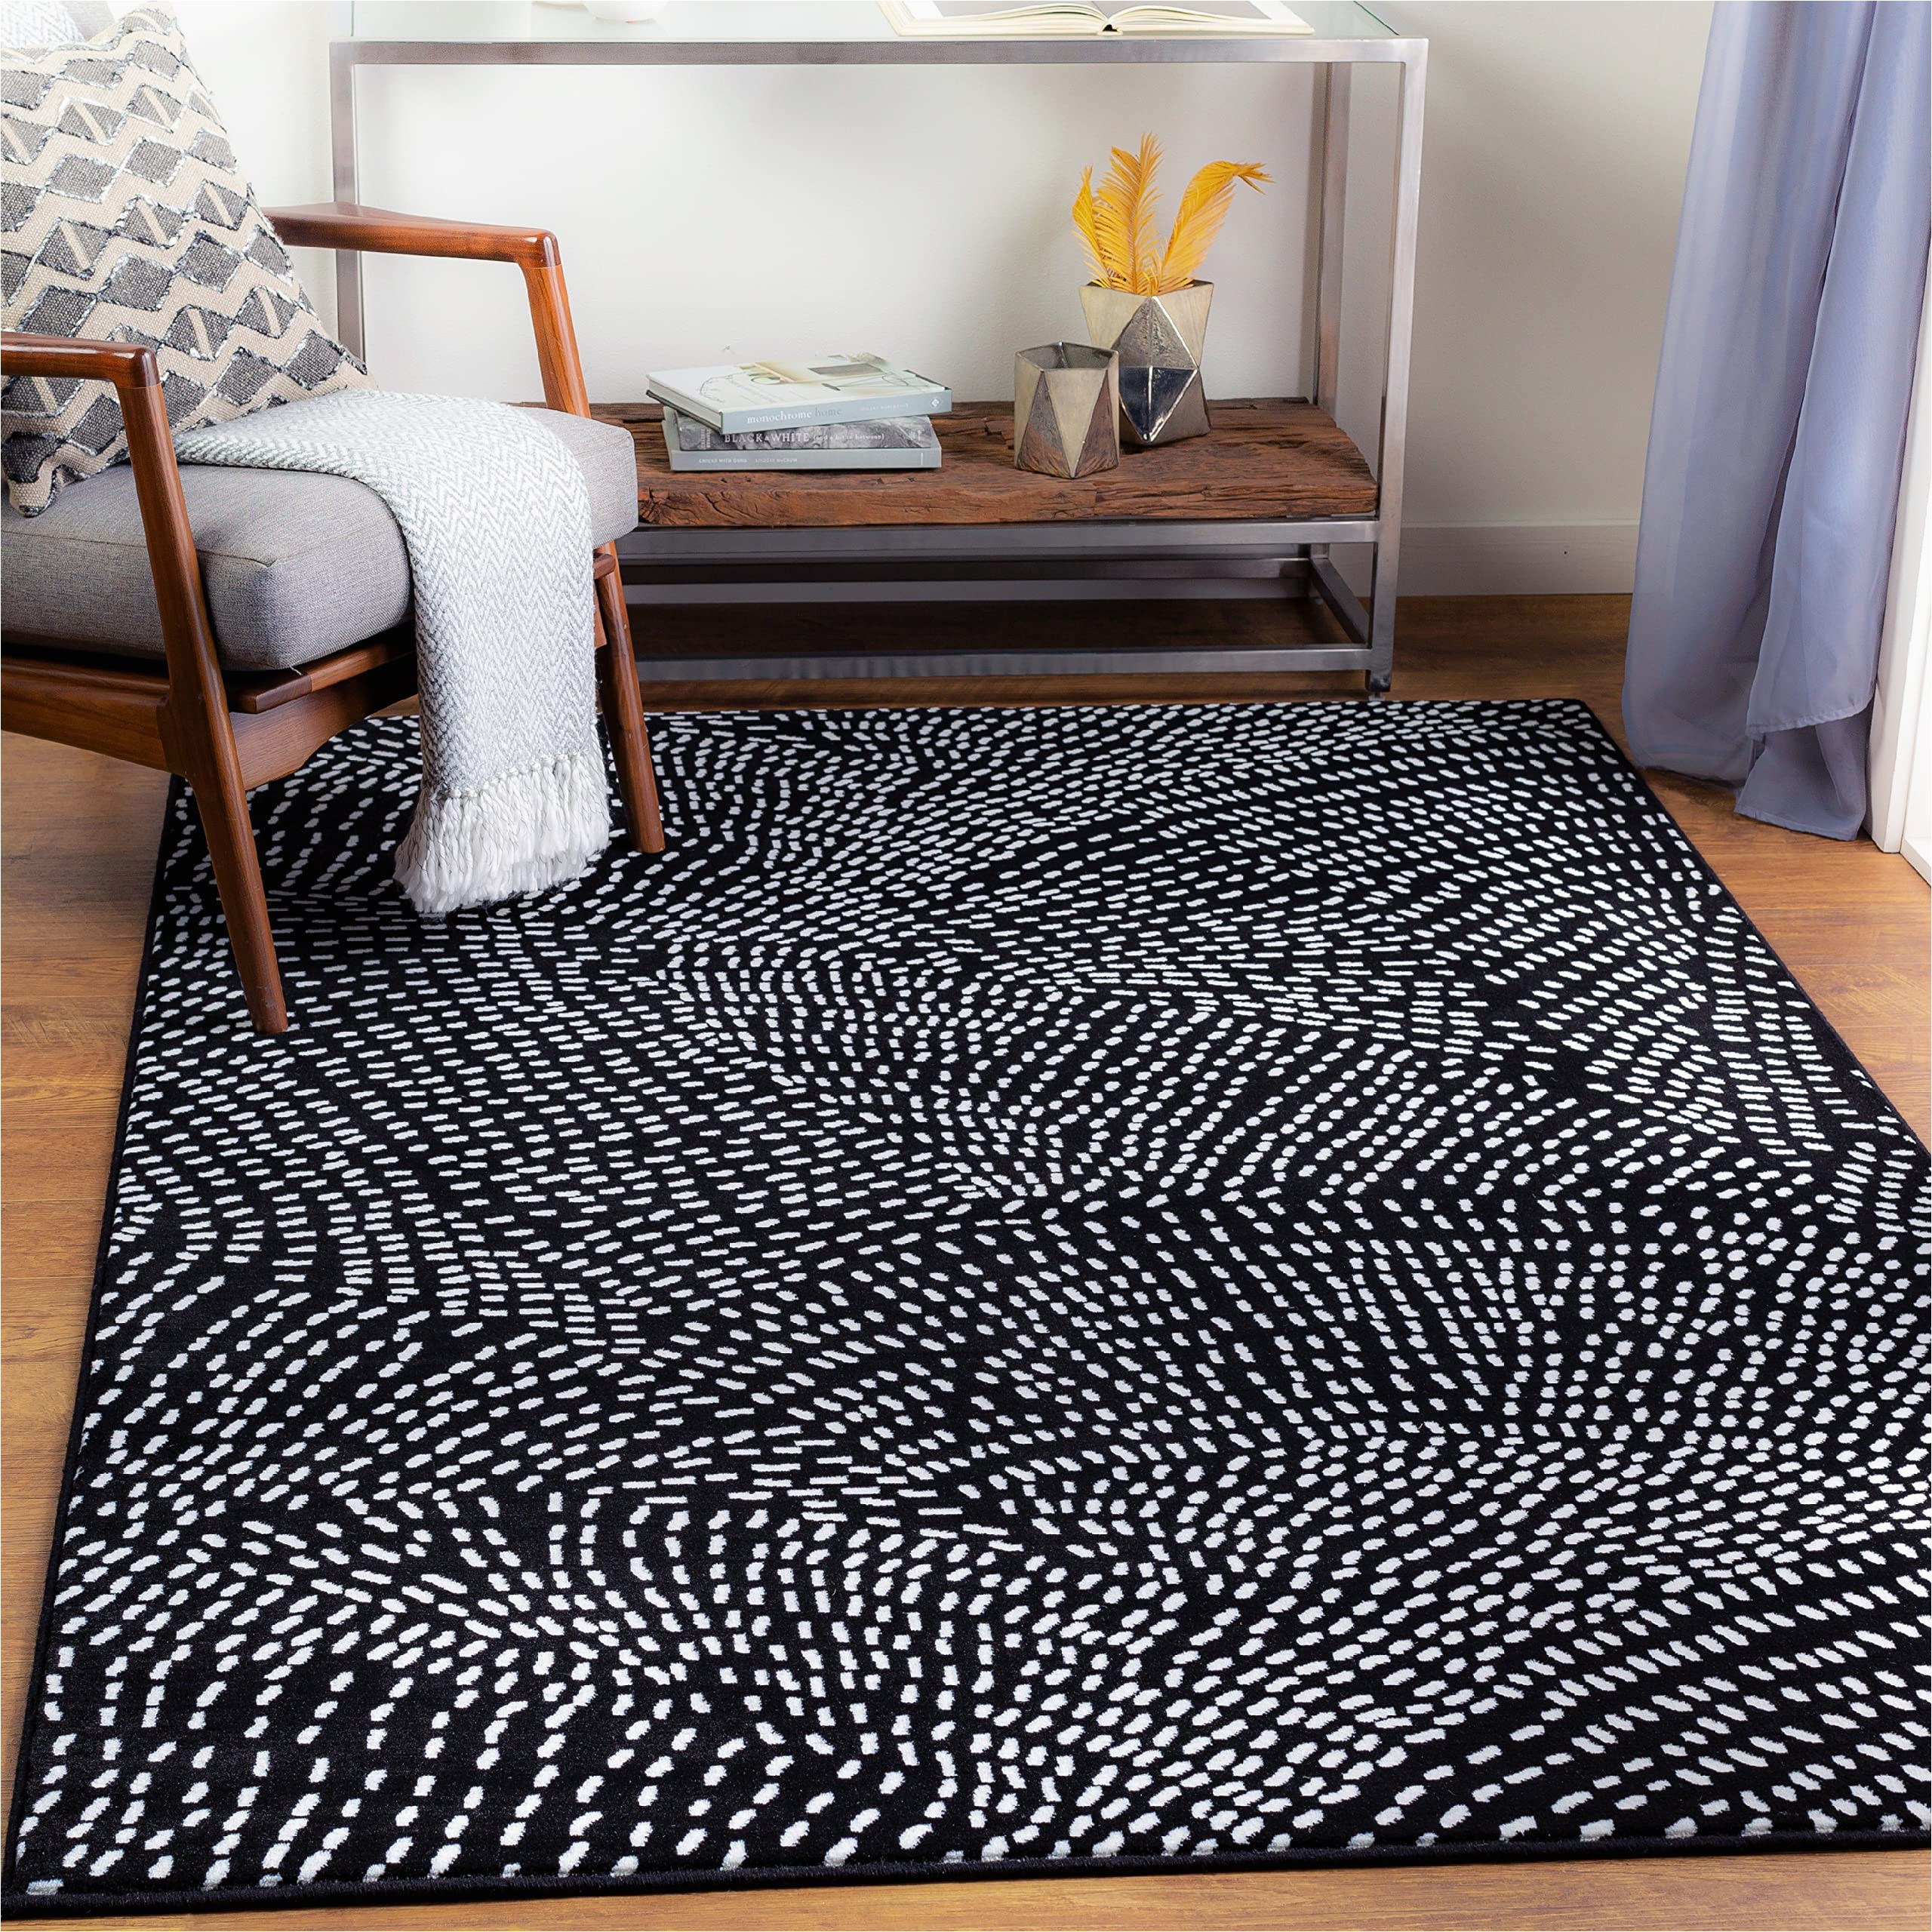 Cheap area Rugs 5 X 7 Mark&day area Rugs, 5×7 Dieden Modern Black area Rug Black White Carpet for Living Room, Bedroom or Kitchen (5’3″ X 7’7″)